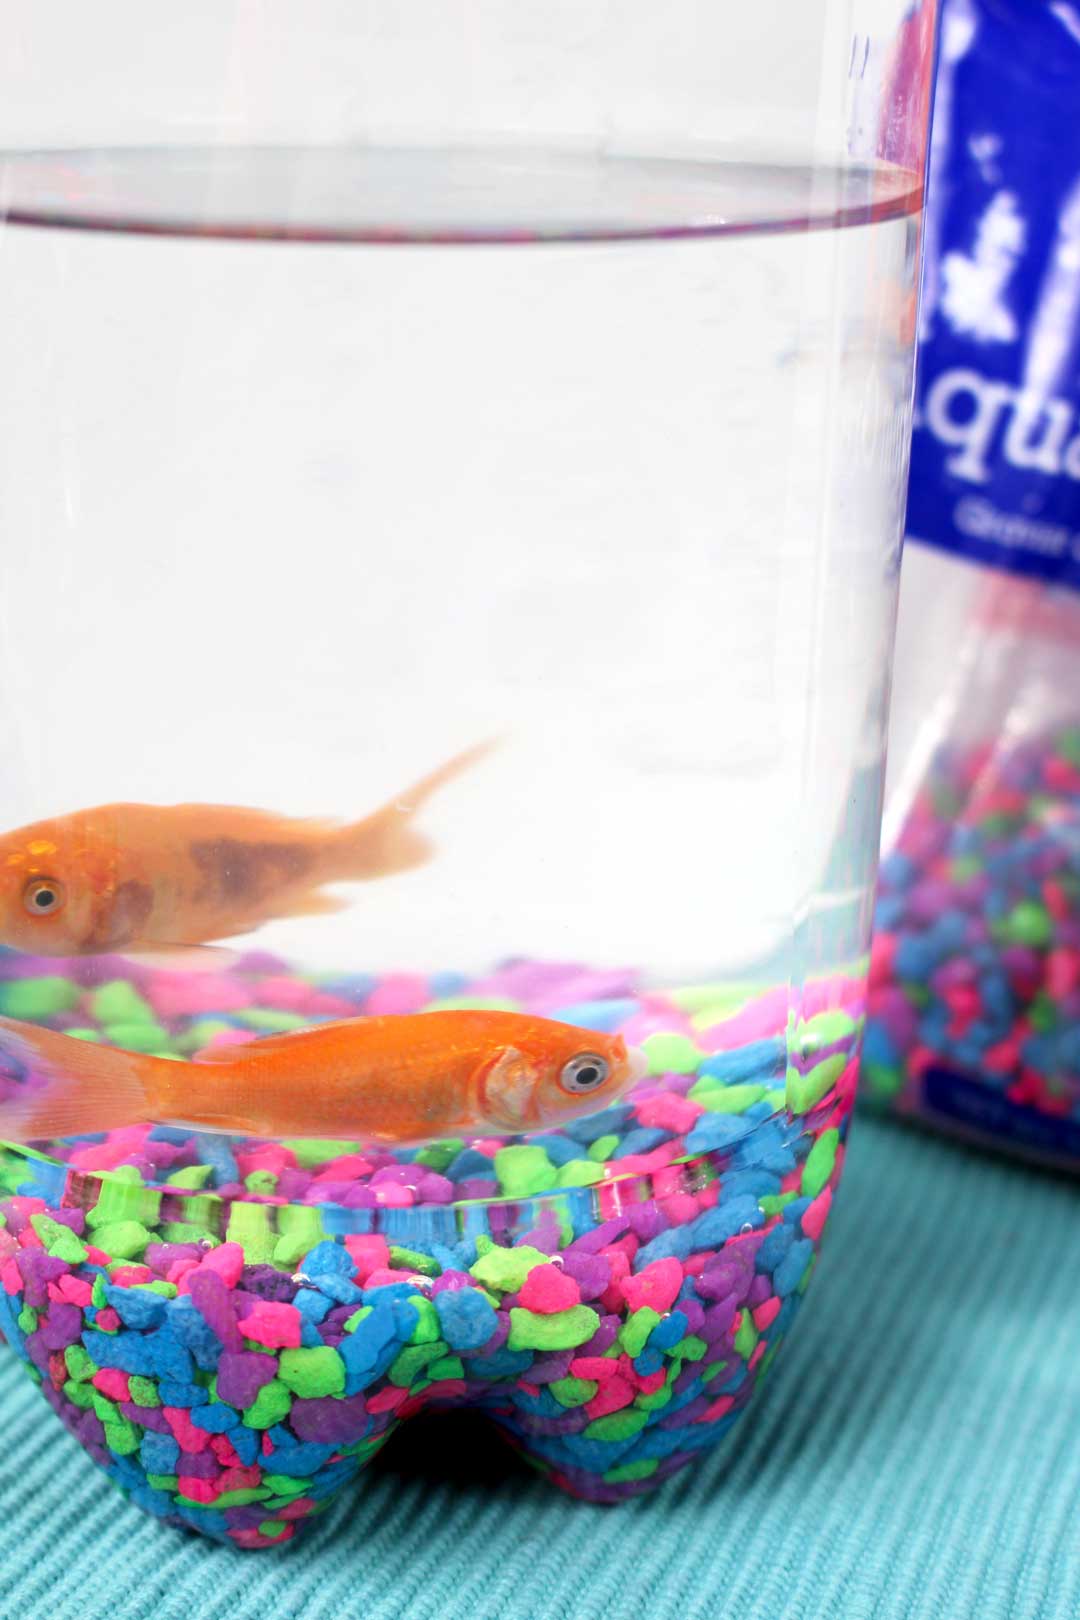 Close up view of two gold fish swimming in DIY 2 - liter bottle fish tank.